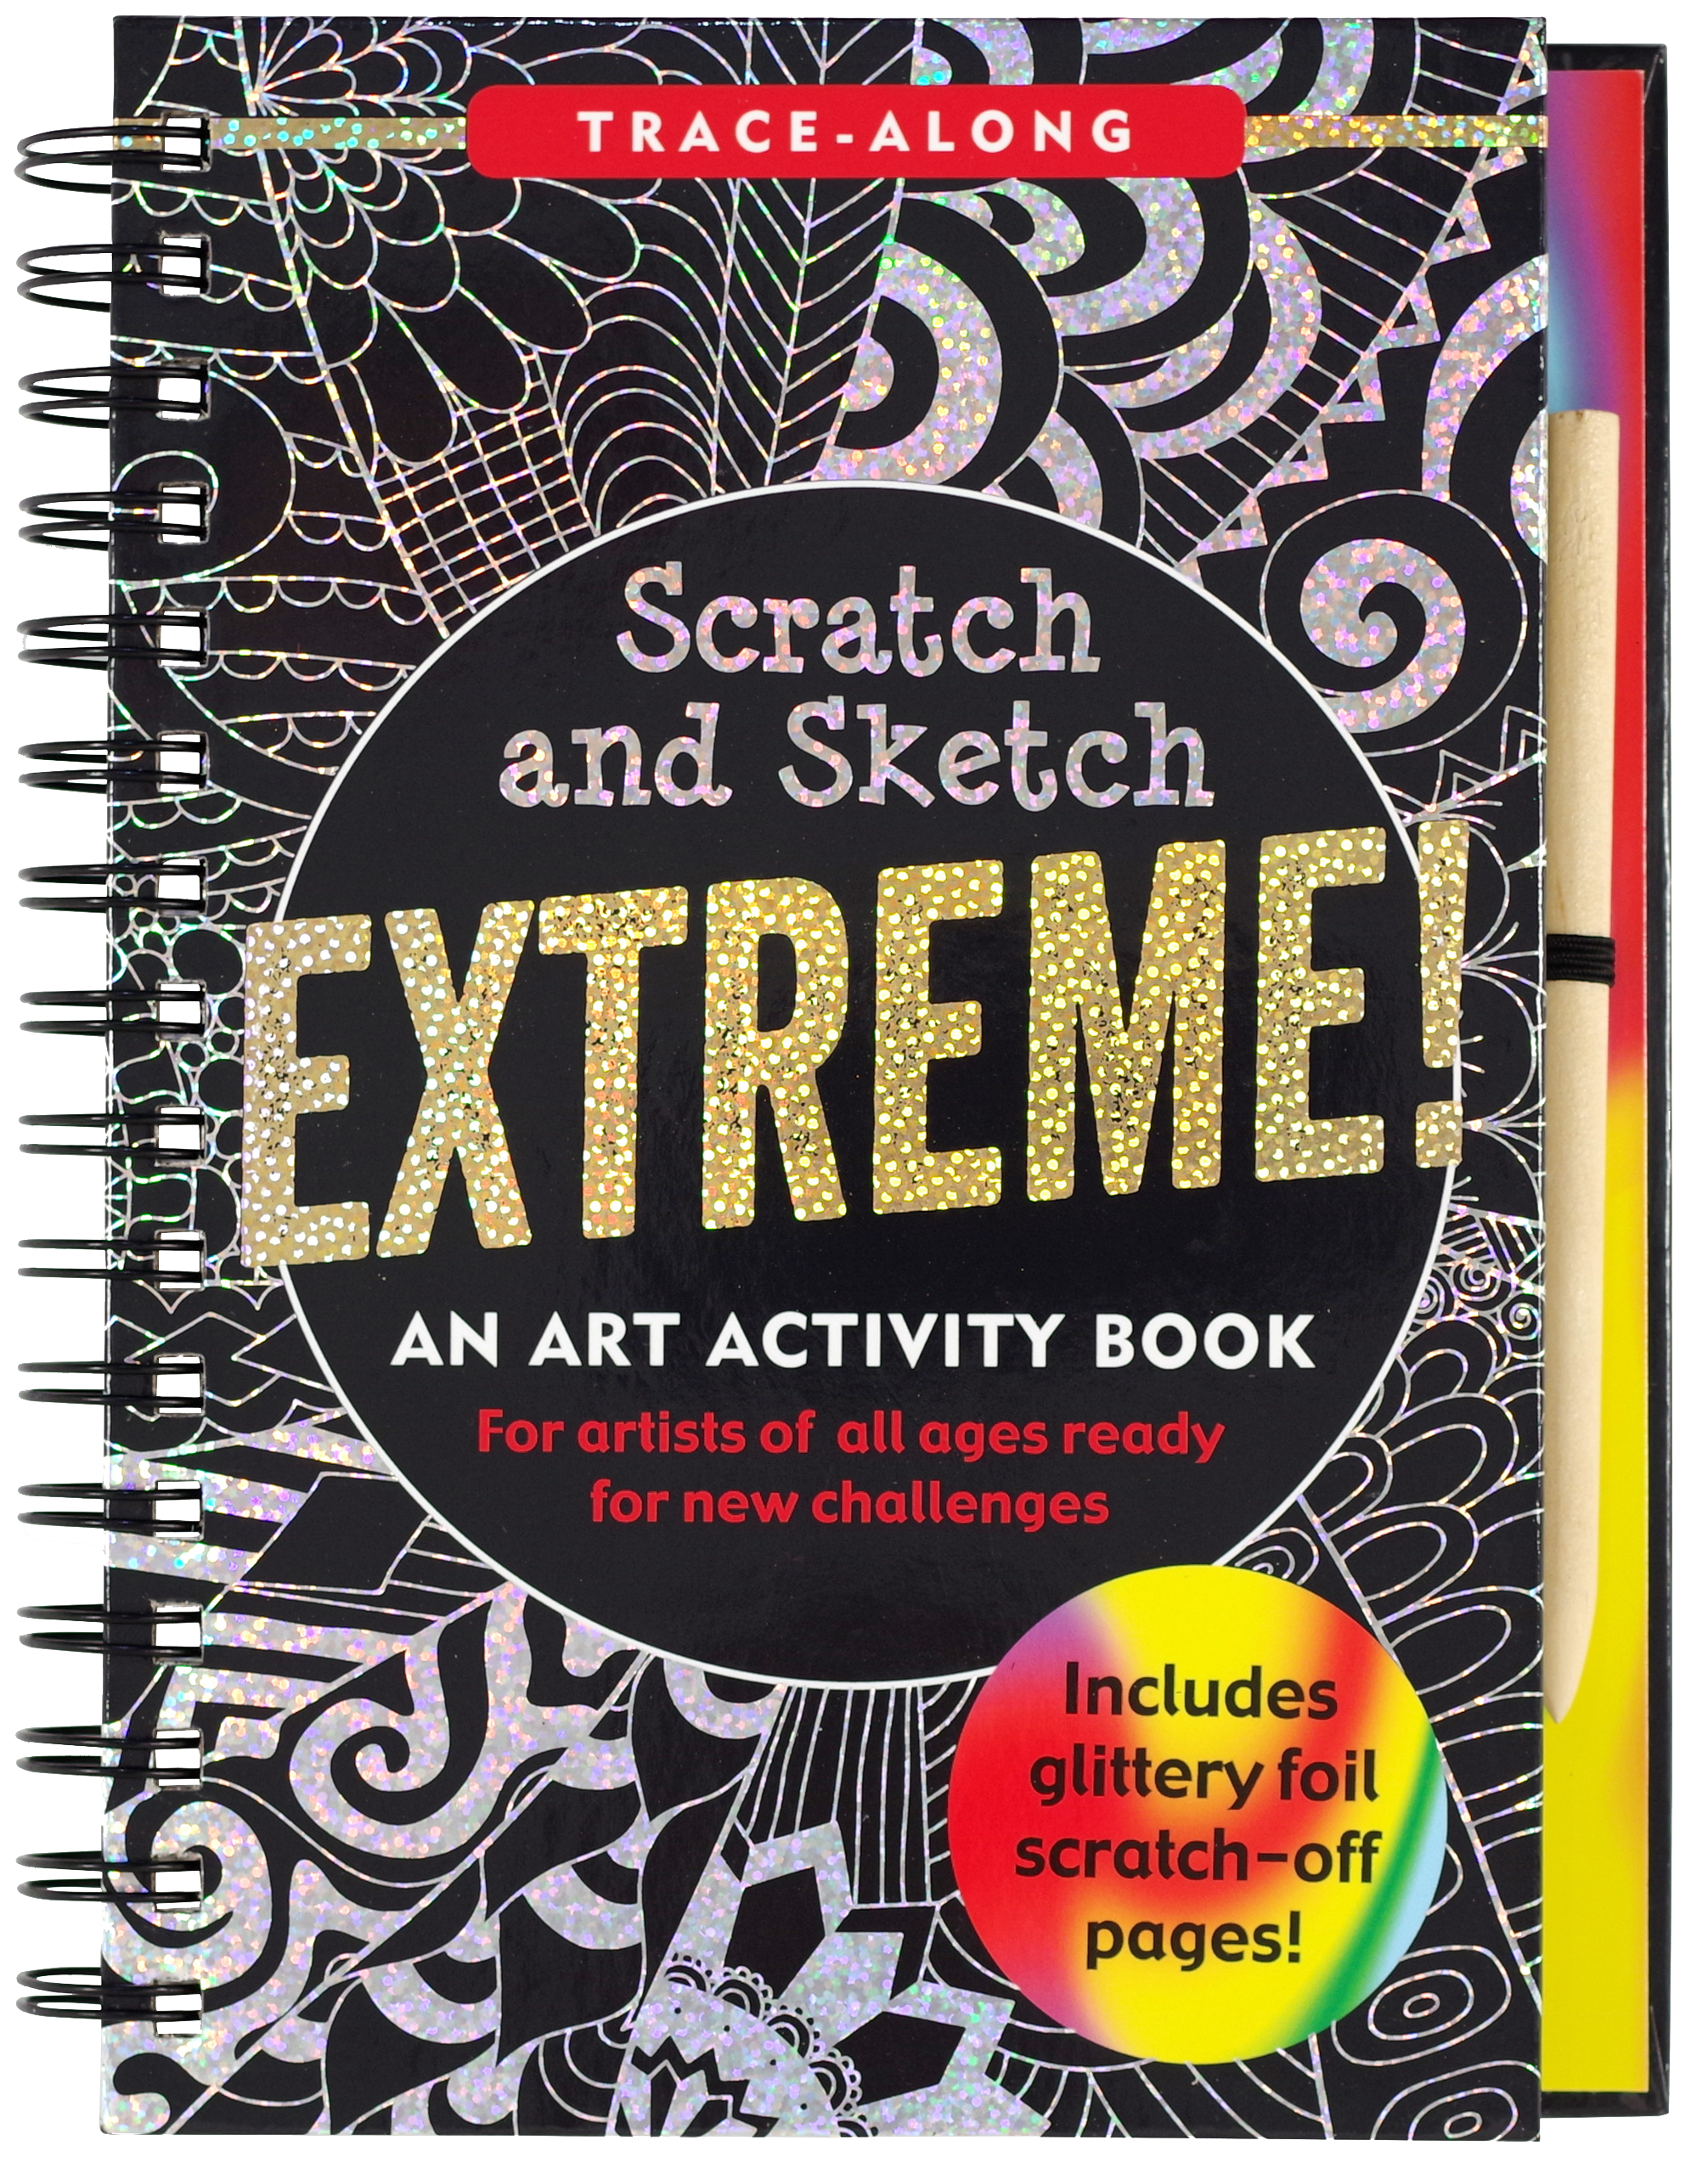 Scratch & Sketch Extreme (Trace Along) [Book]